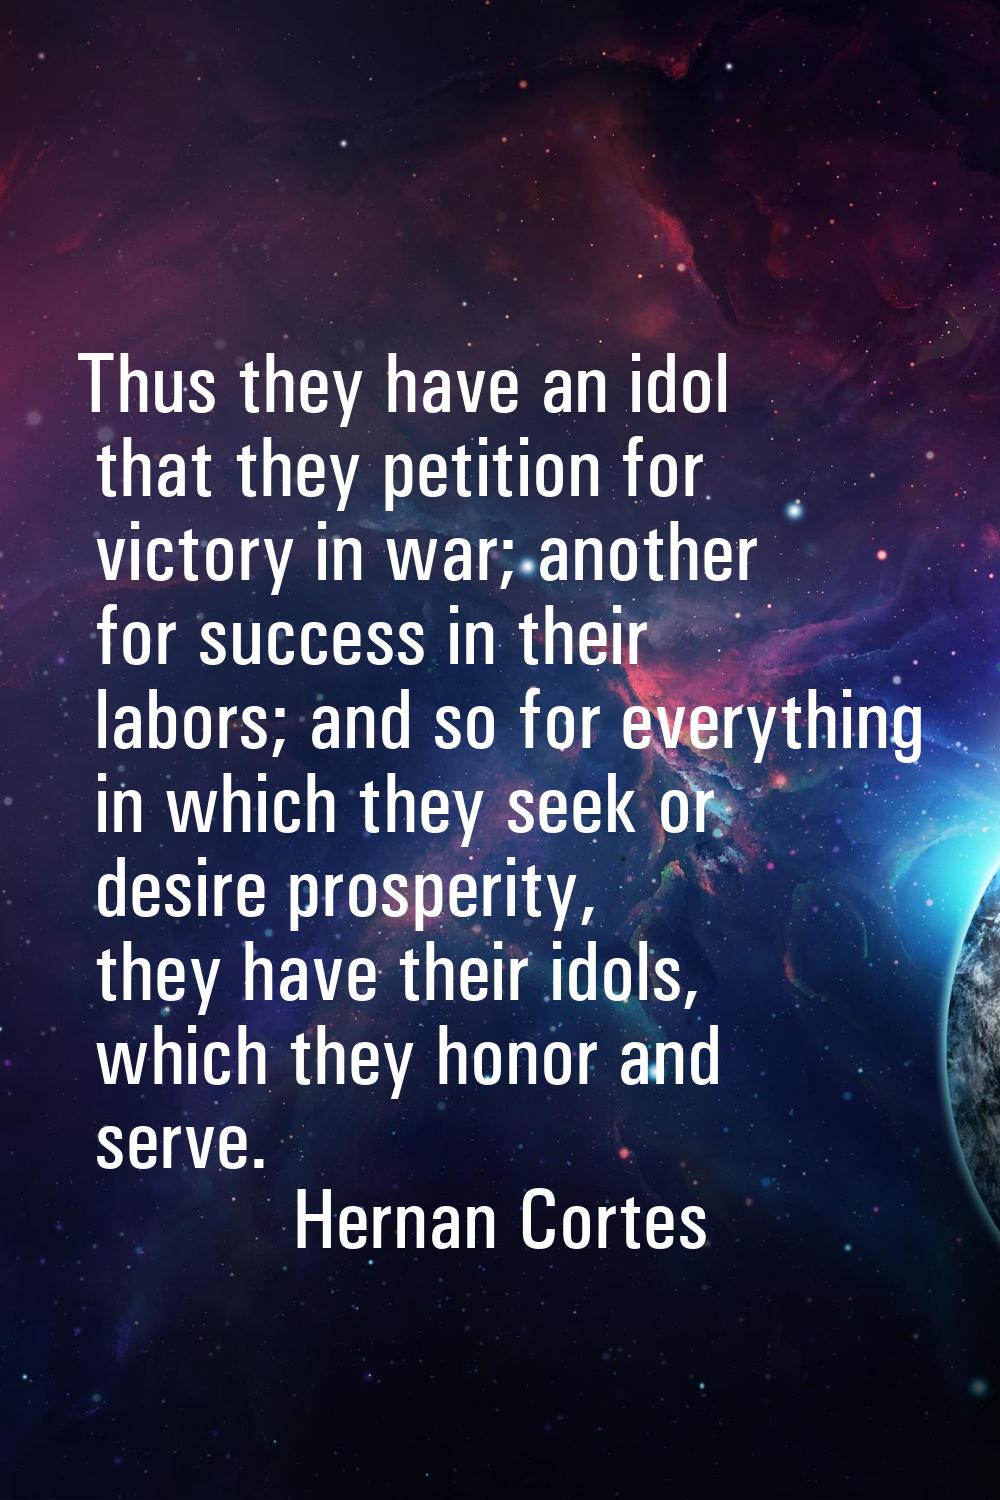 Thus they have an idol that they petition for victory in war; another for success in their labors; 